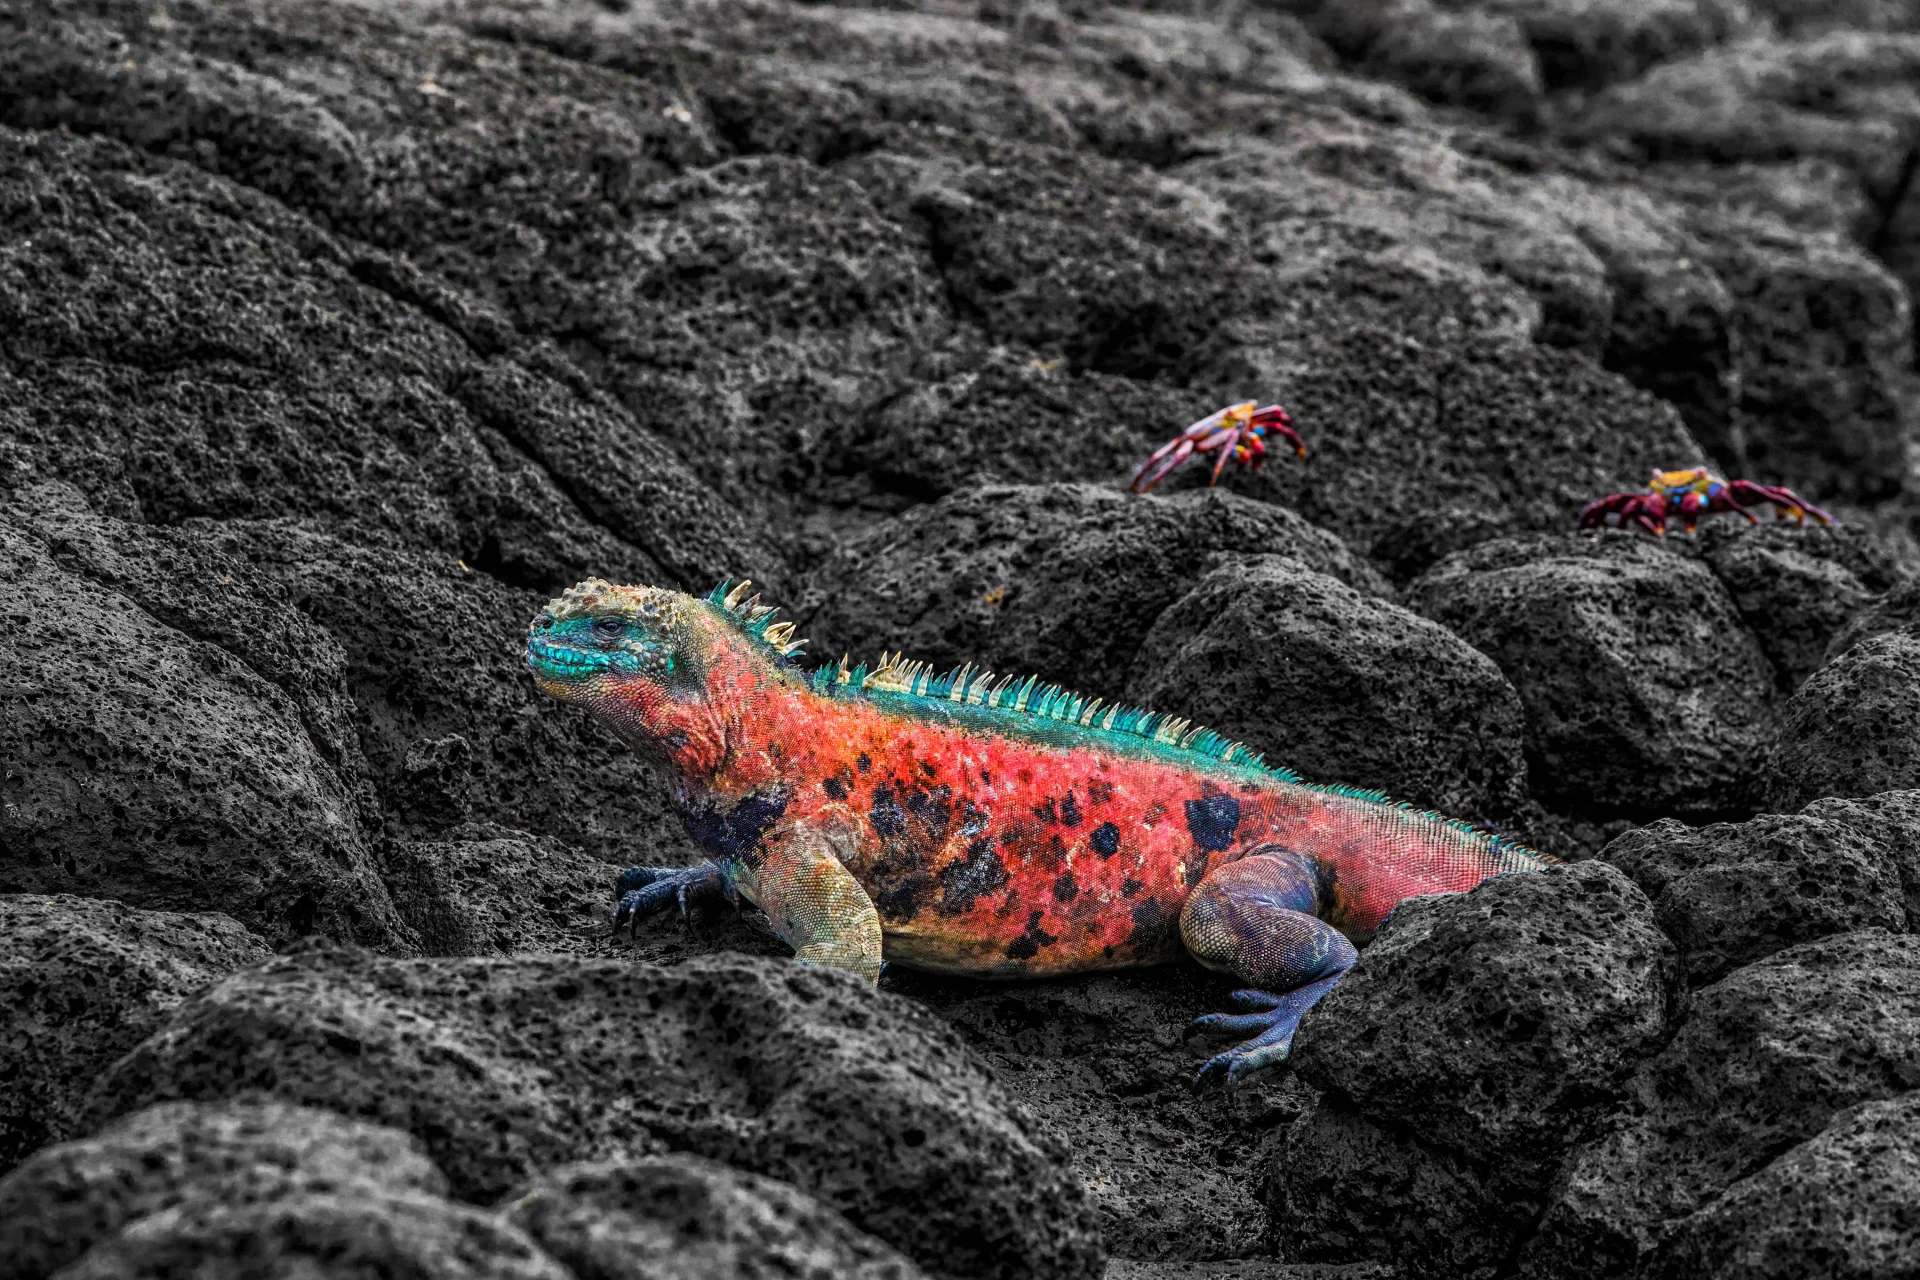  Expedition Cruise to the Galápagos Islands